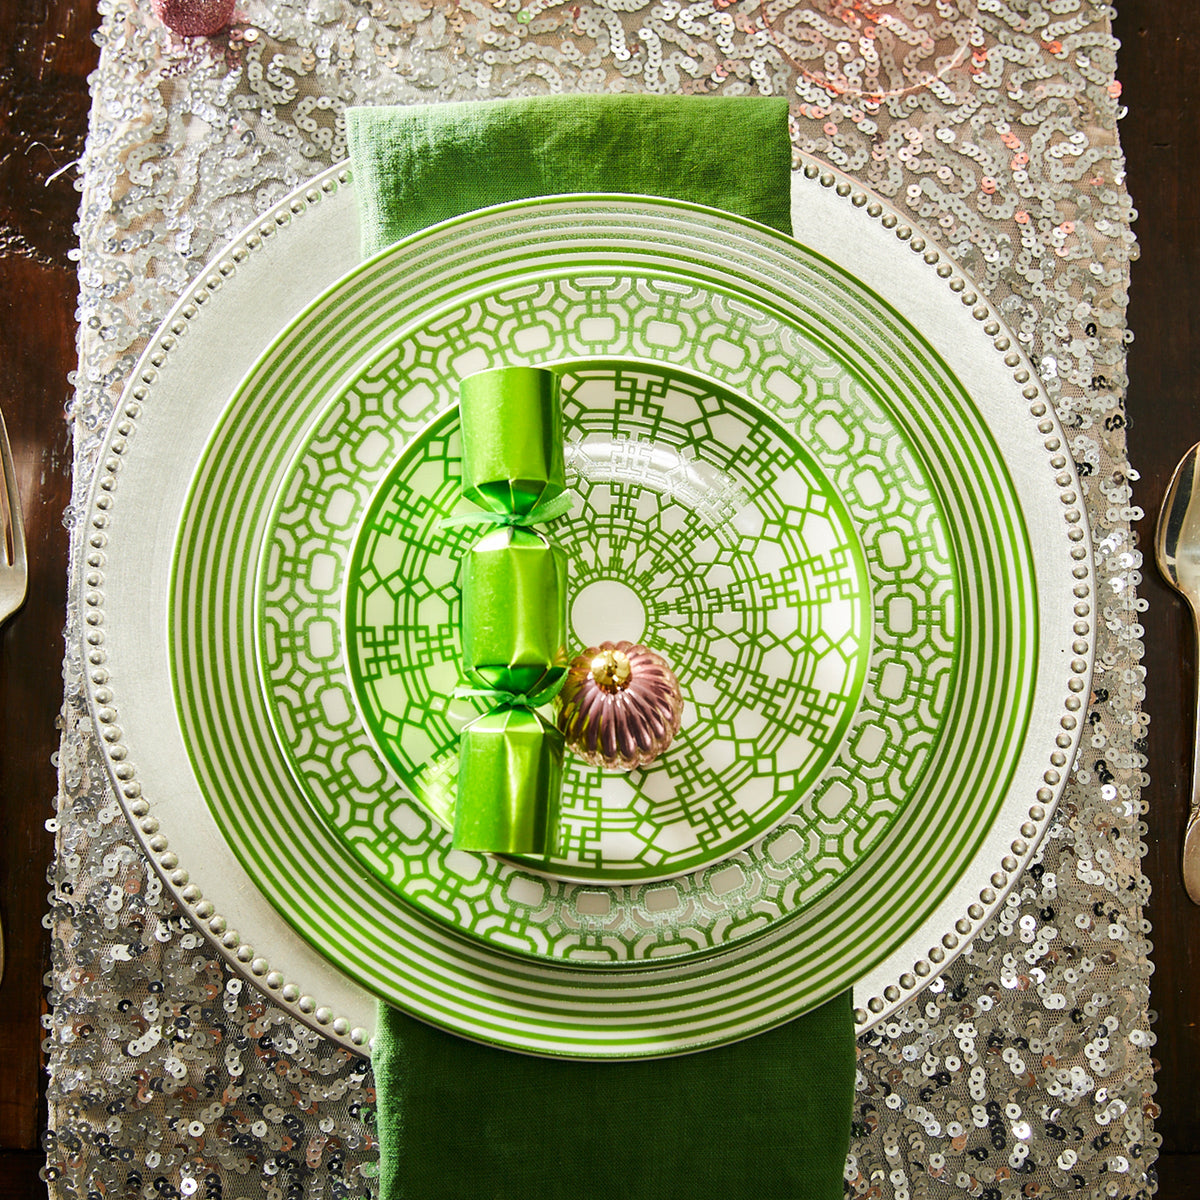 Elegant table setting with a Caskata Artisanal Home Newport Stripe Verde Rimmed Dinner Plate, a small green cracker, and a metallic seashell ornament atop a green napkin and sparkly silver tablecloth.